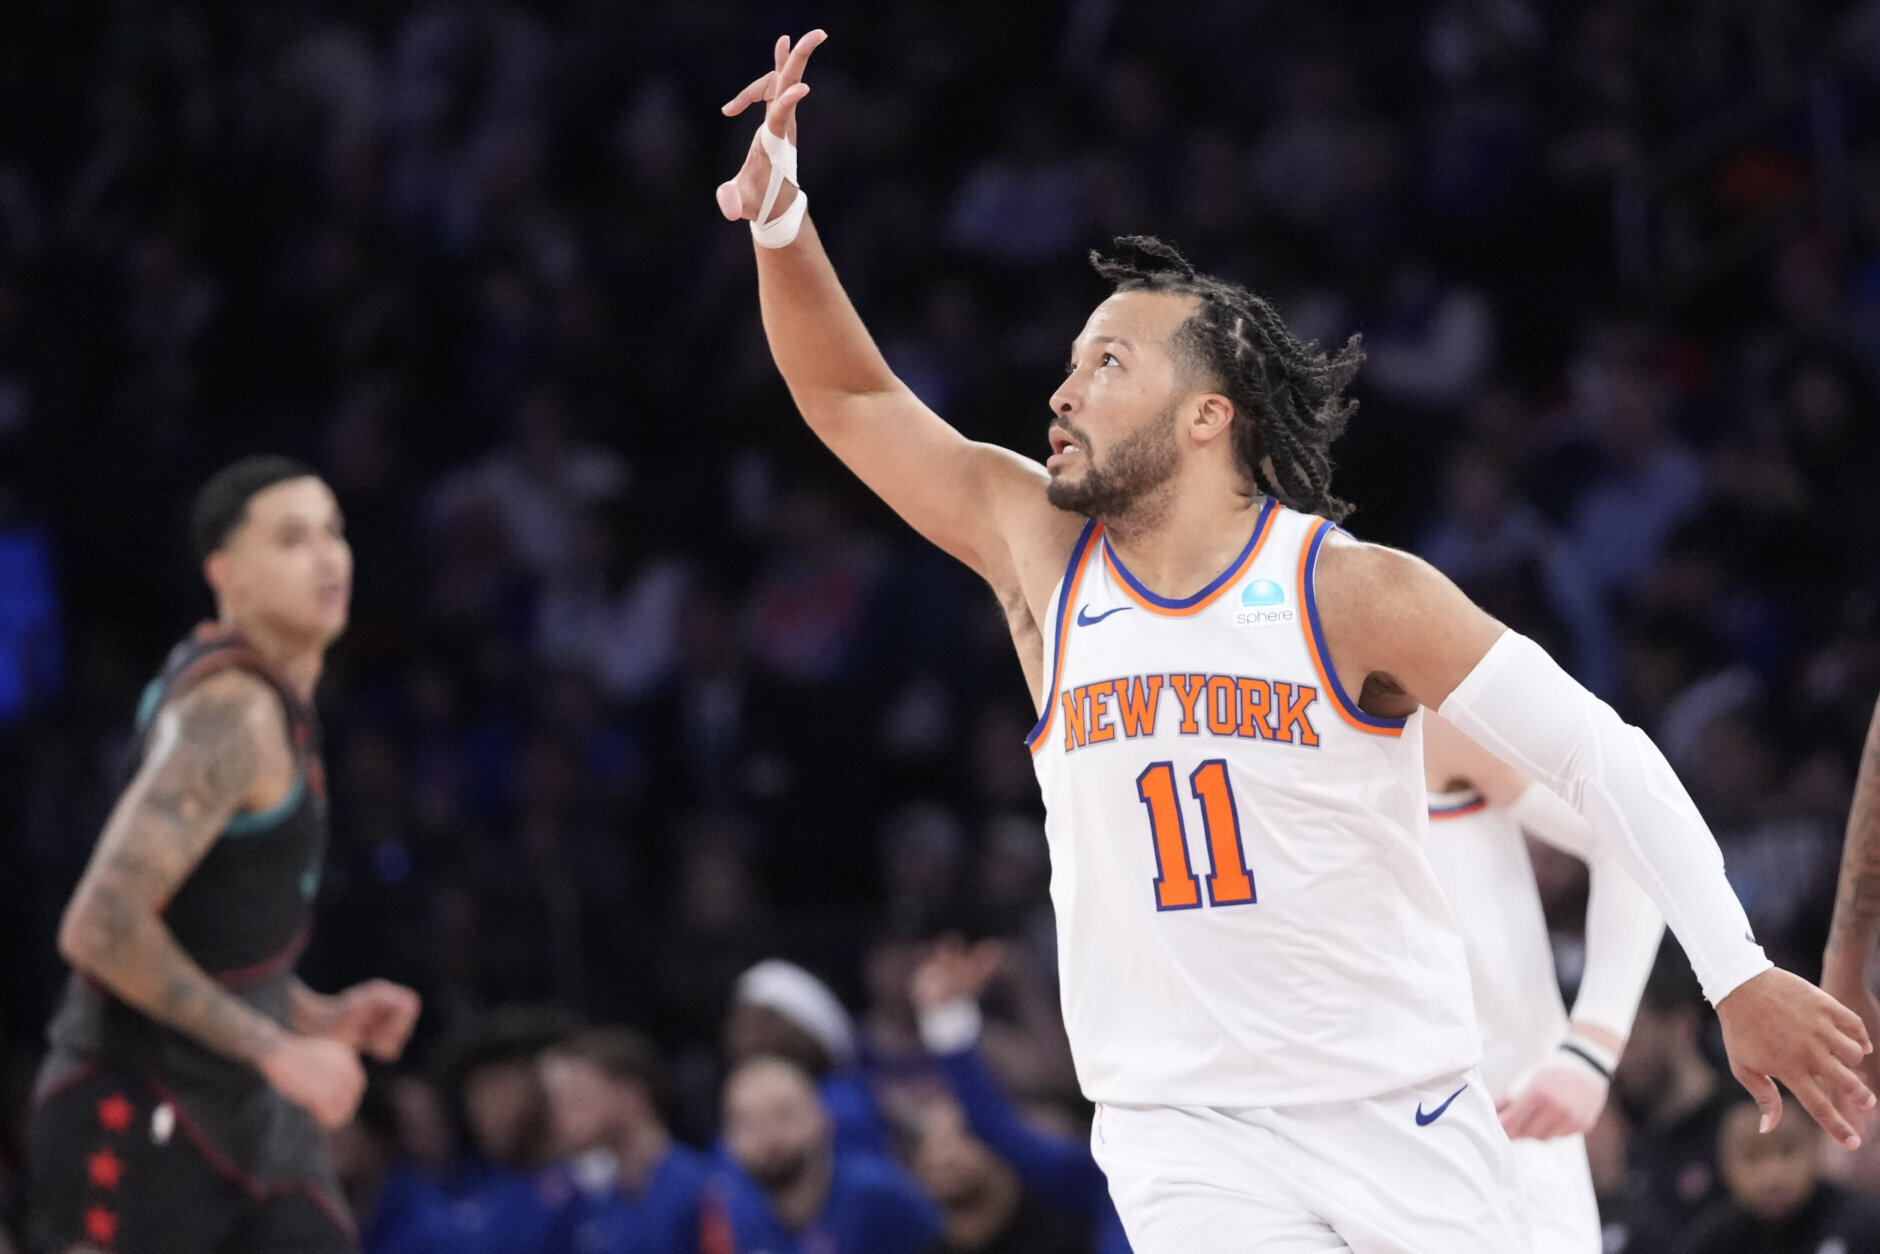 Jalen Brunson scores 41 points to lead the Knicks to a 113-109 victory over  the Wizards - WTOP News